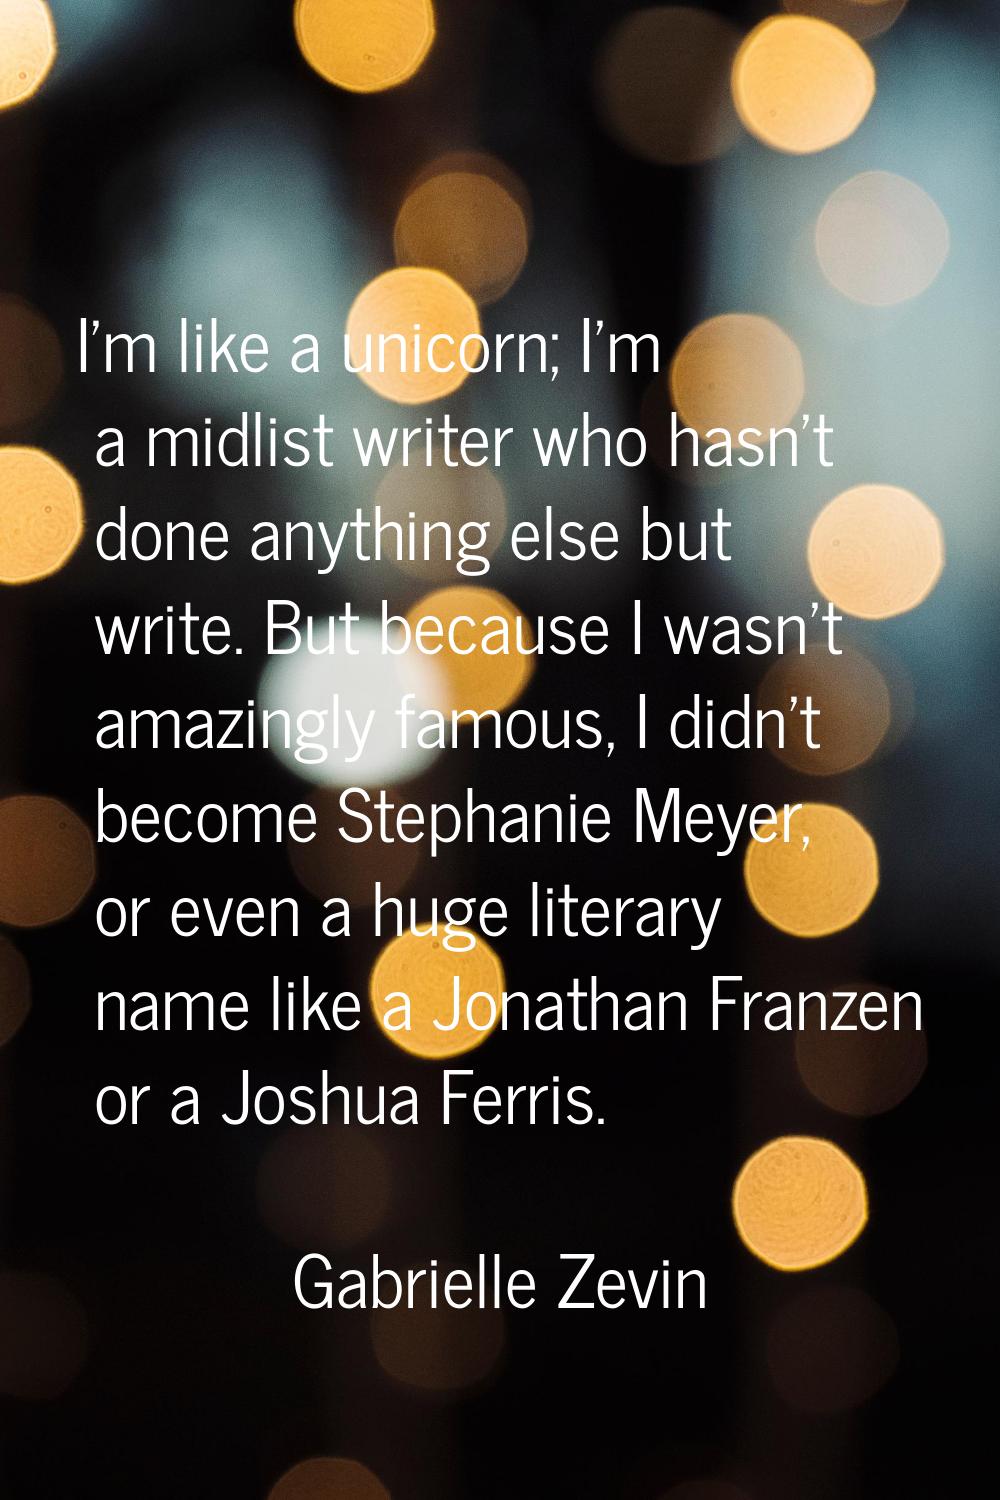 I'm like a unicorn; I'm a midlist writer who hasn't done anything else but write. But because I was